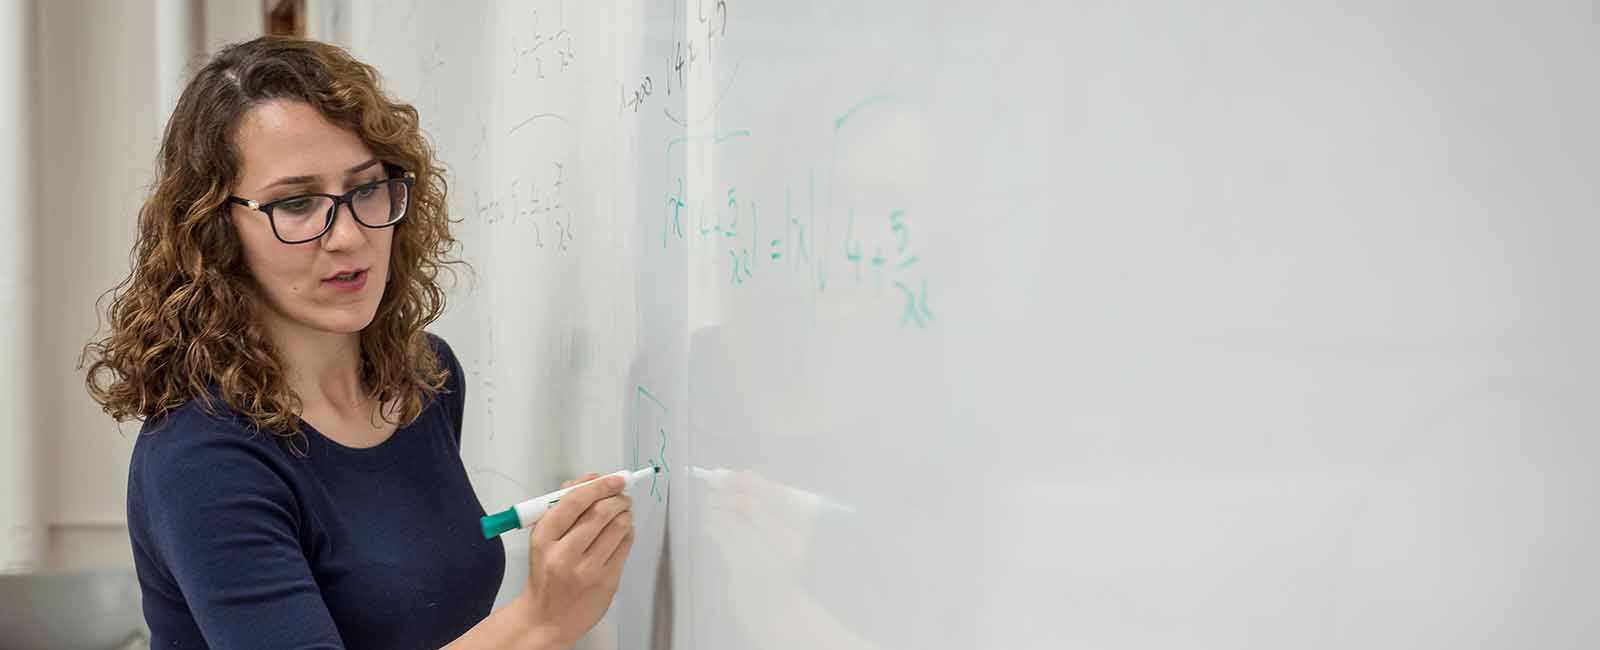 Graduate student demonstrating solving math equations on whiteboard